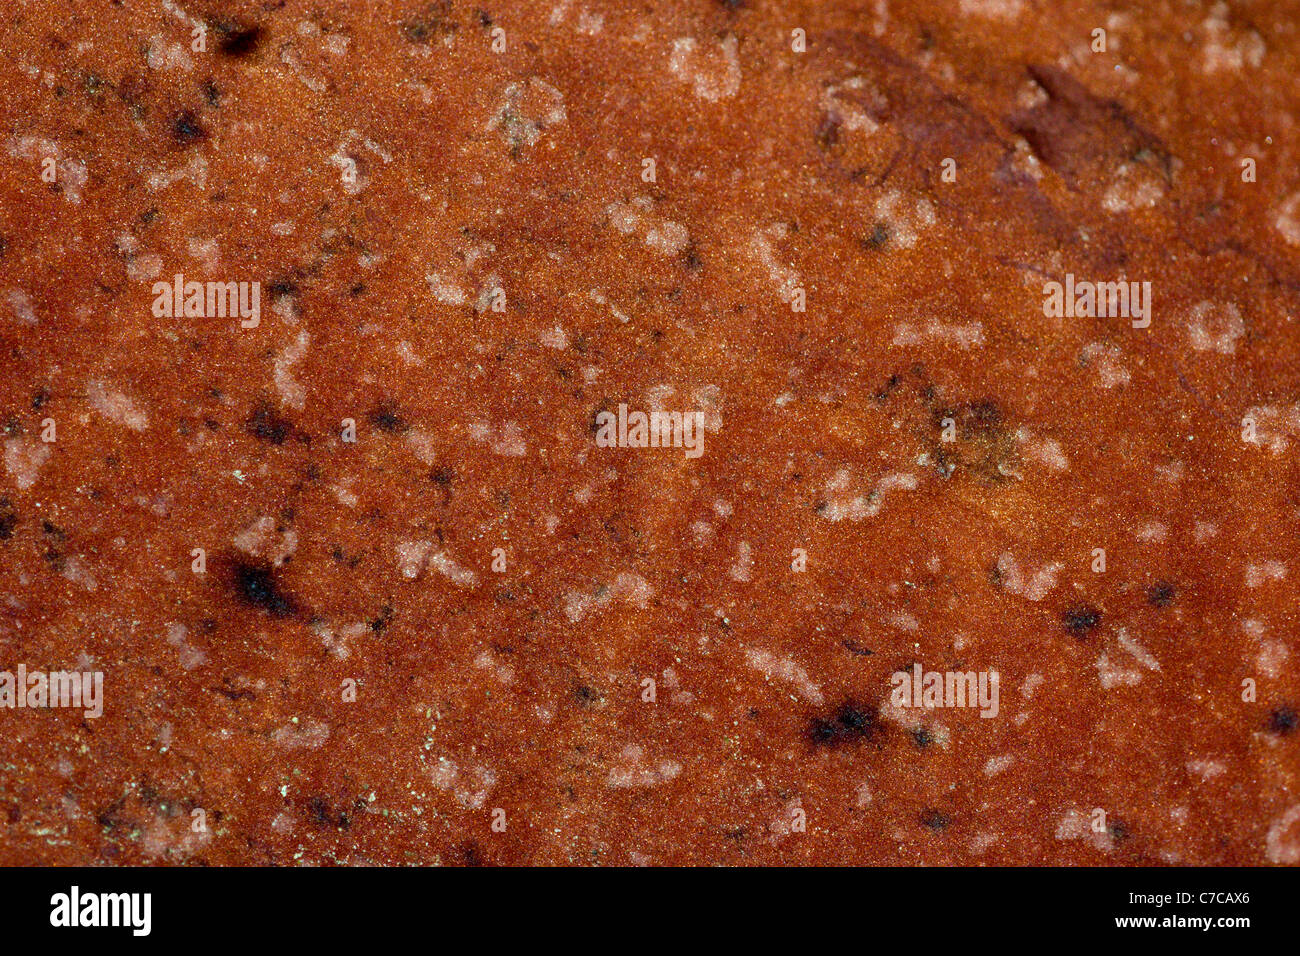 Macro surface structure of one of the five lobes of Rafflesia kerrii. Stock Photo